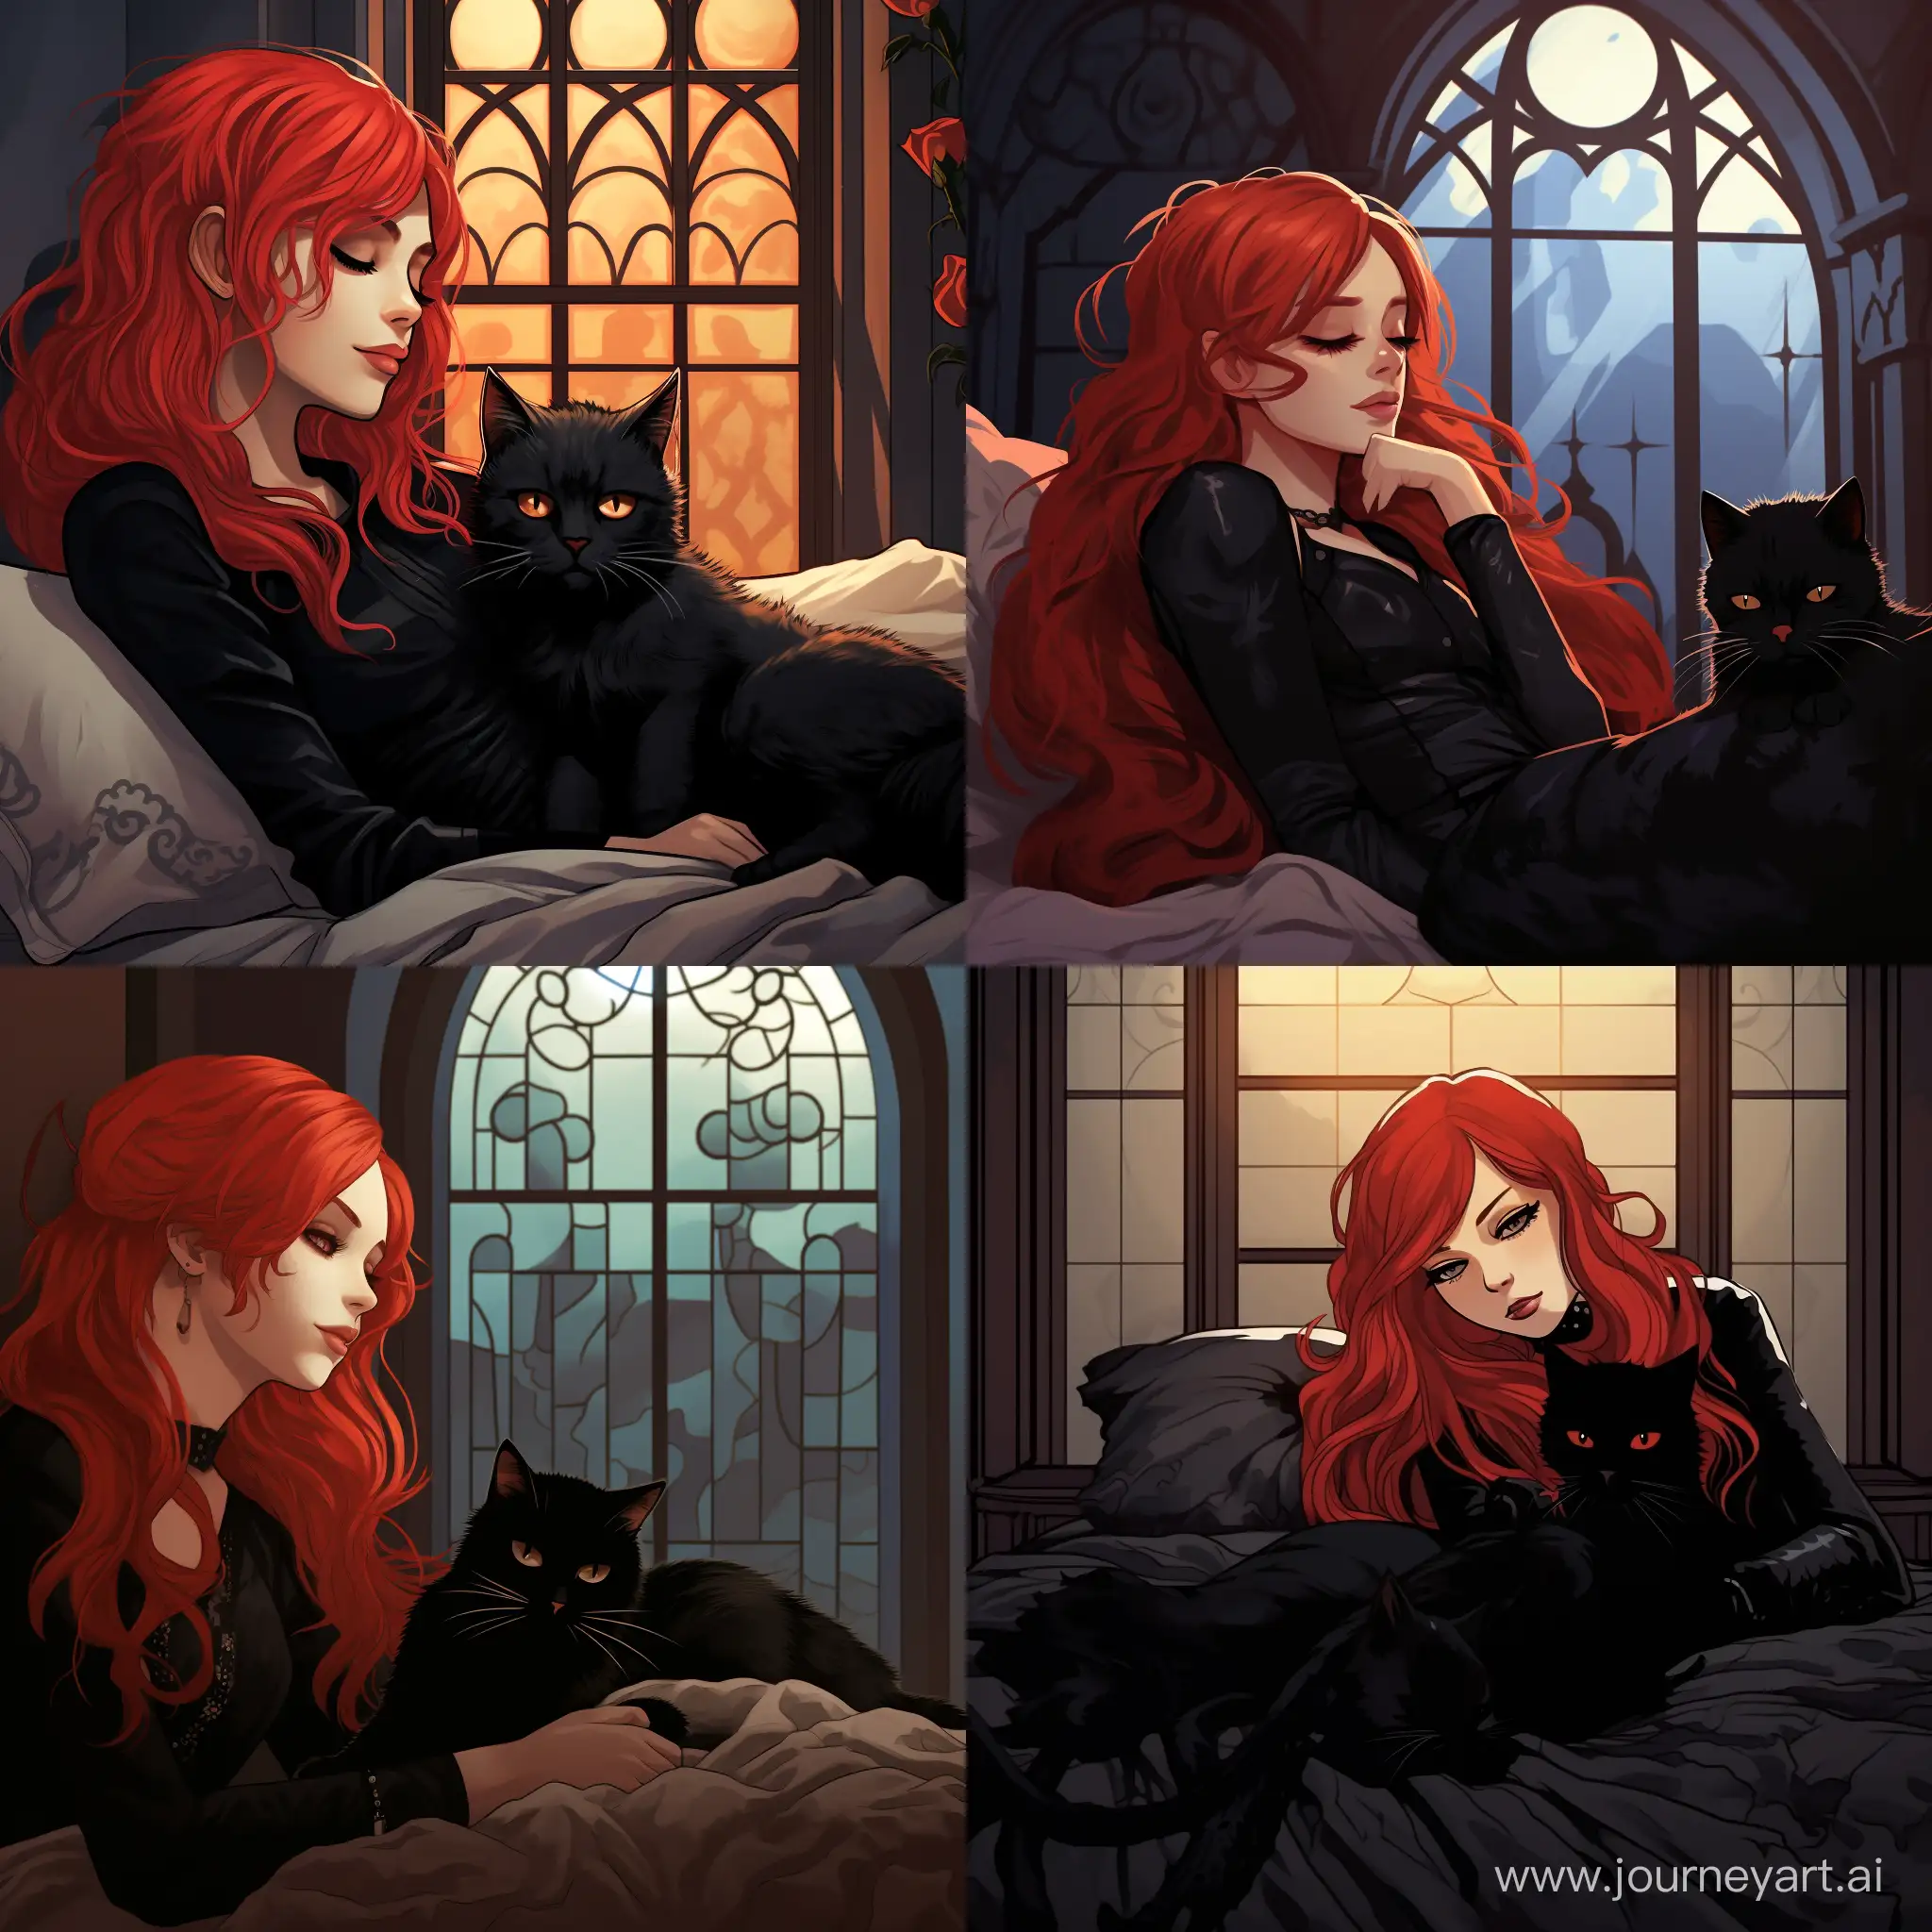 A girl with red hair in a black Gothic dress sleeps on a bed next to a Gothic-style cat during the day